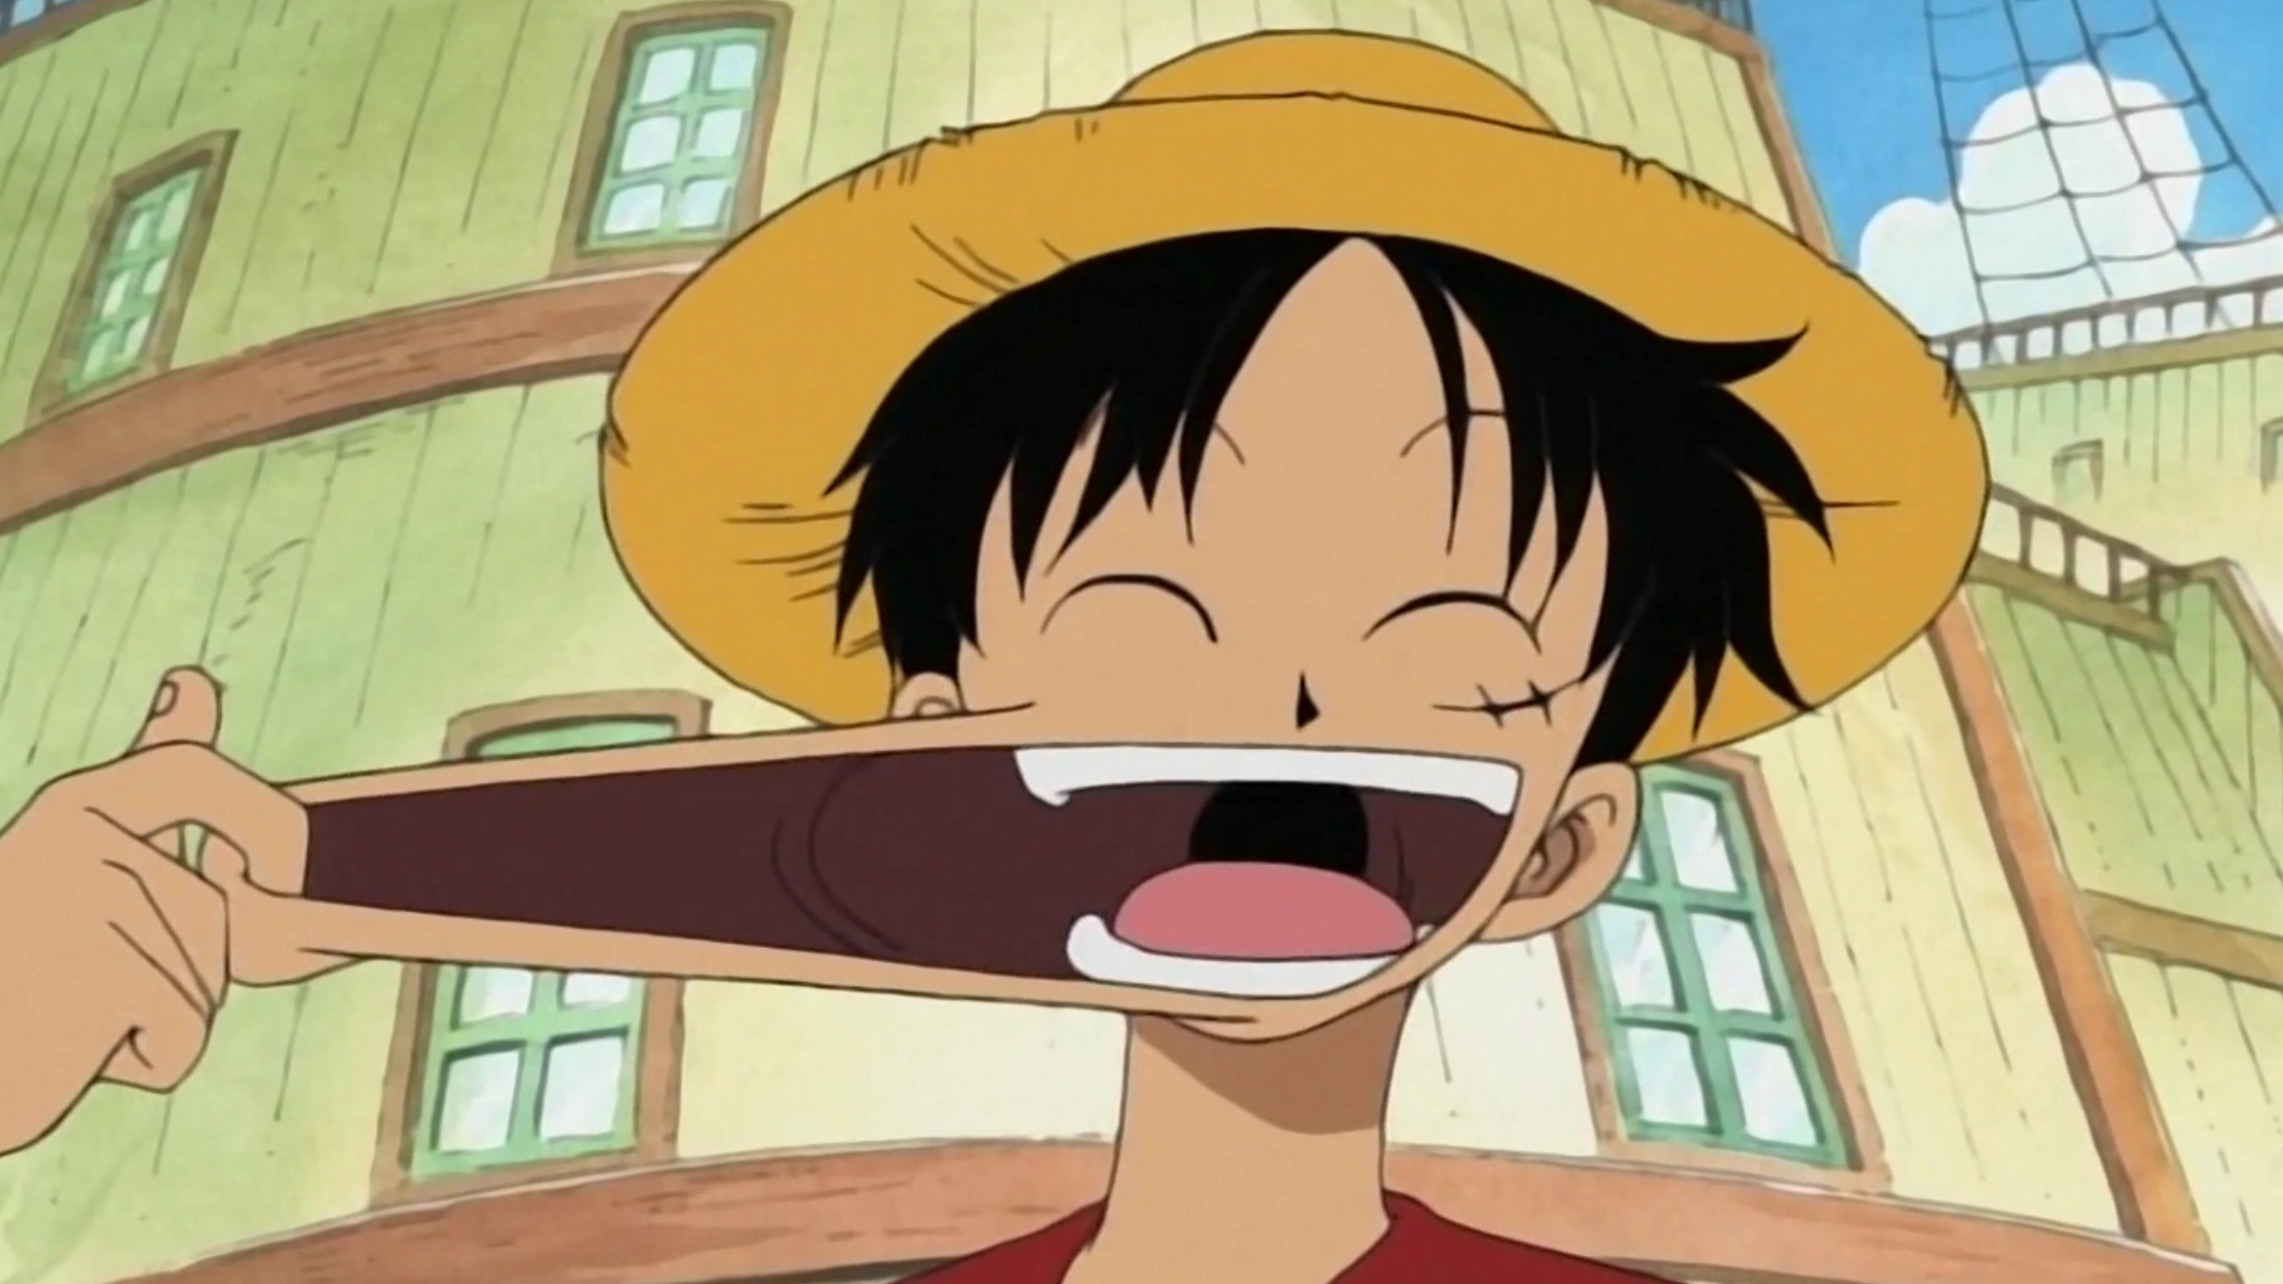 Luffy nell'anime di One Piece